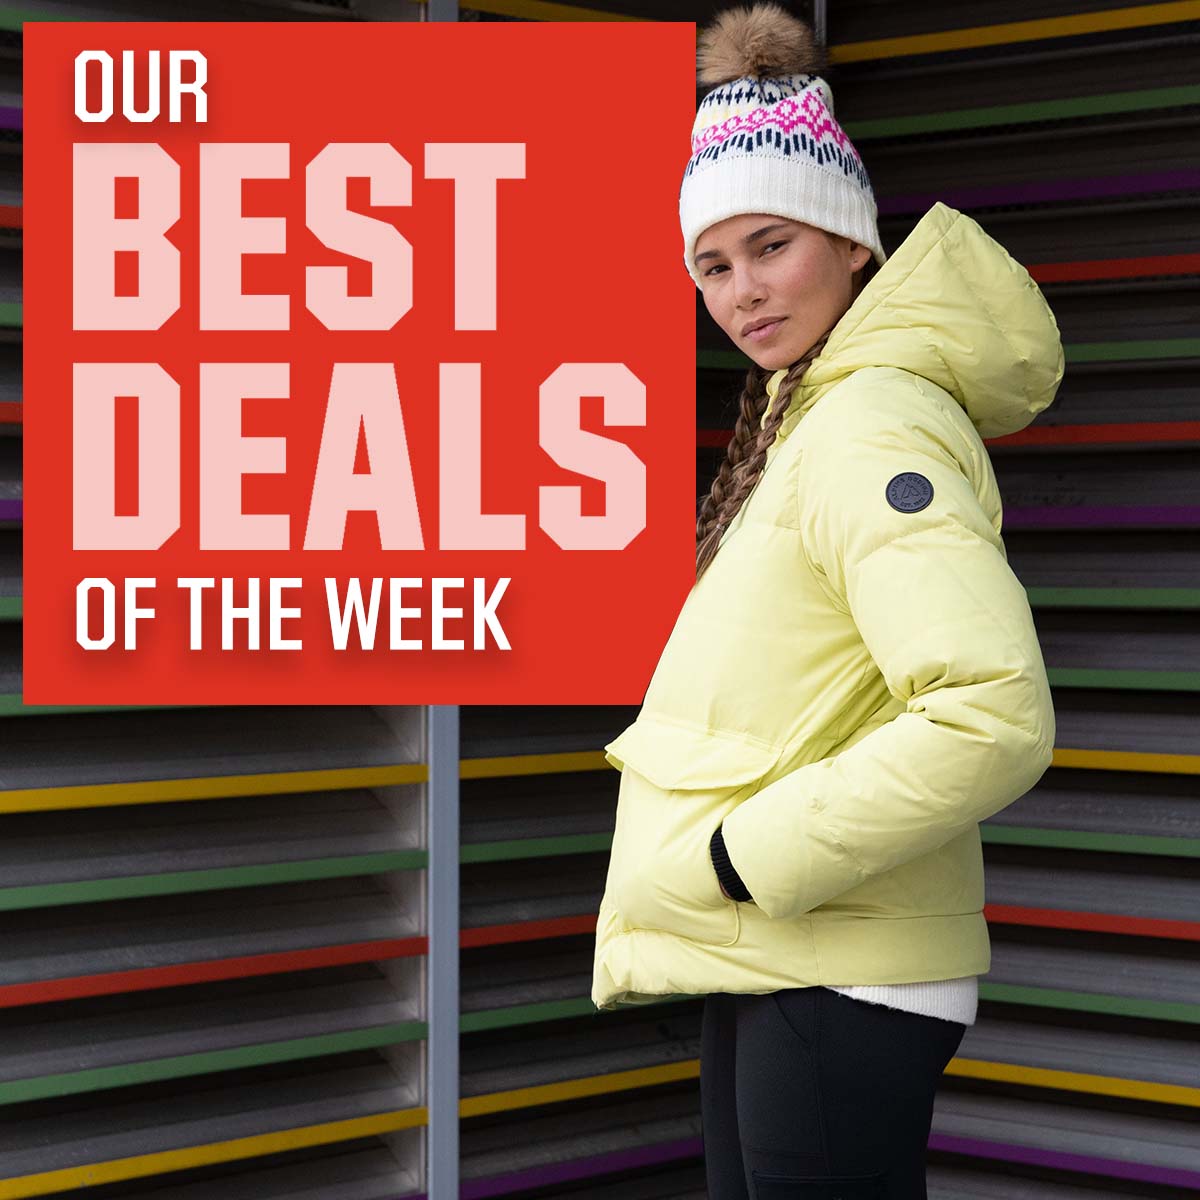 Our best deals of the week.